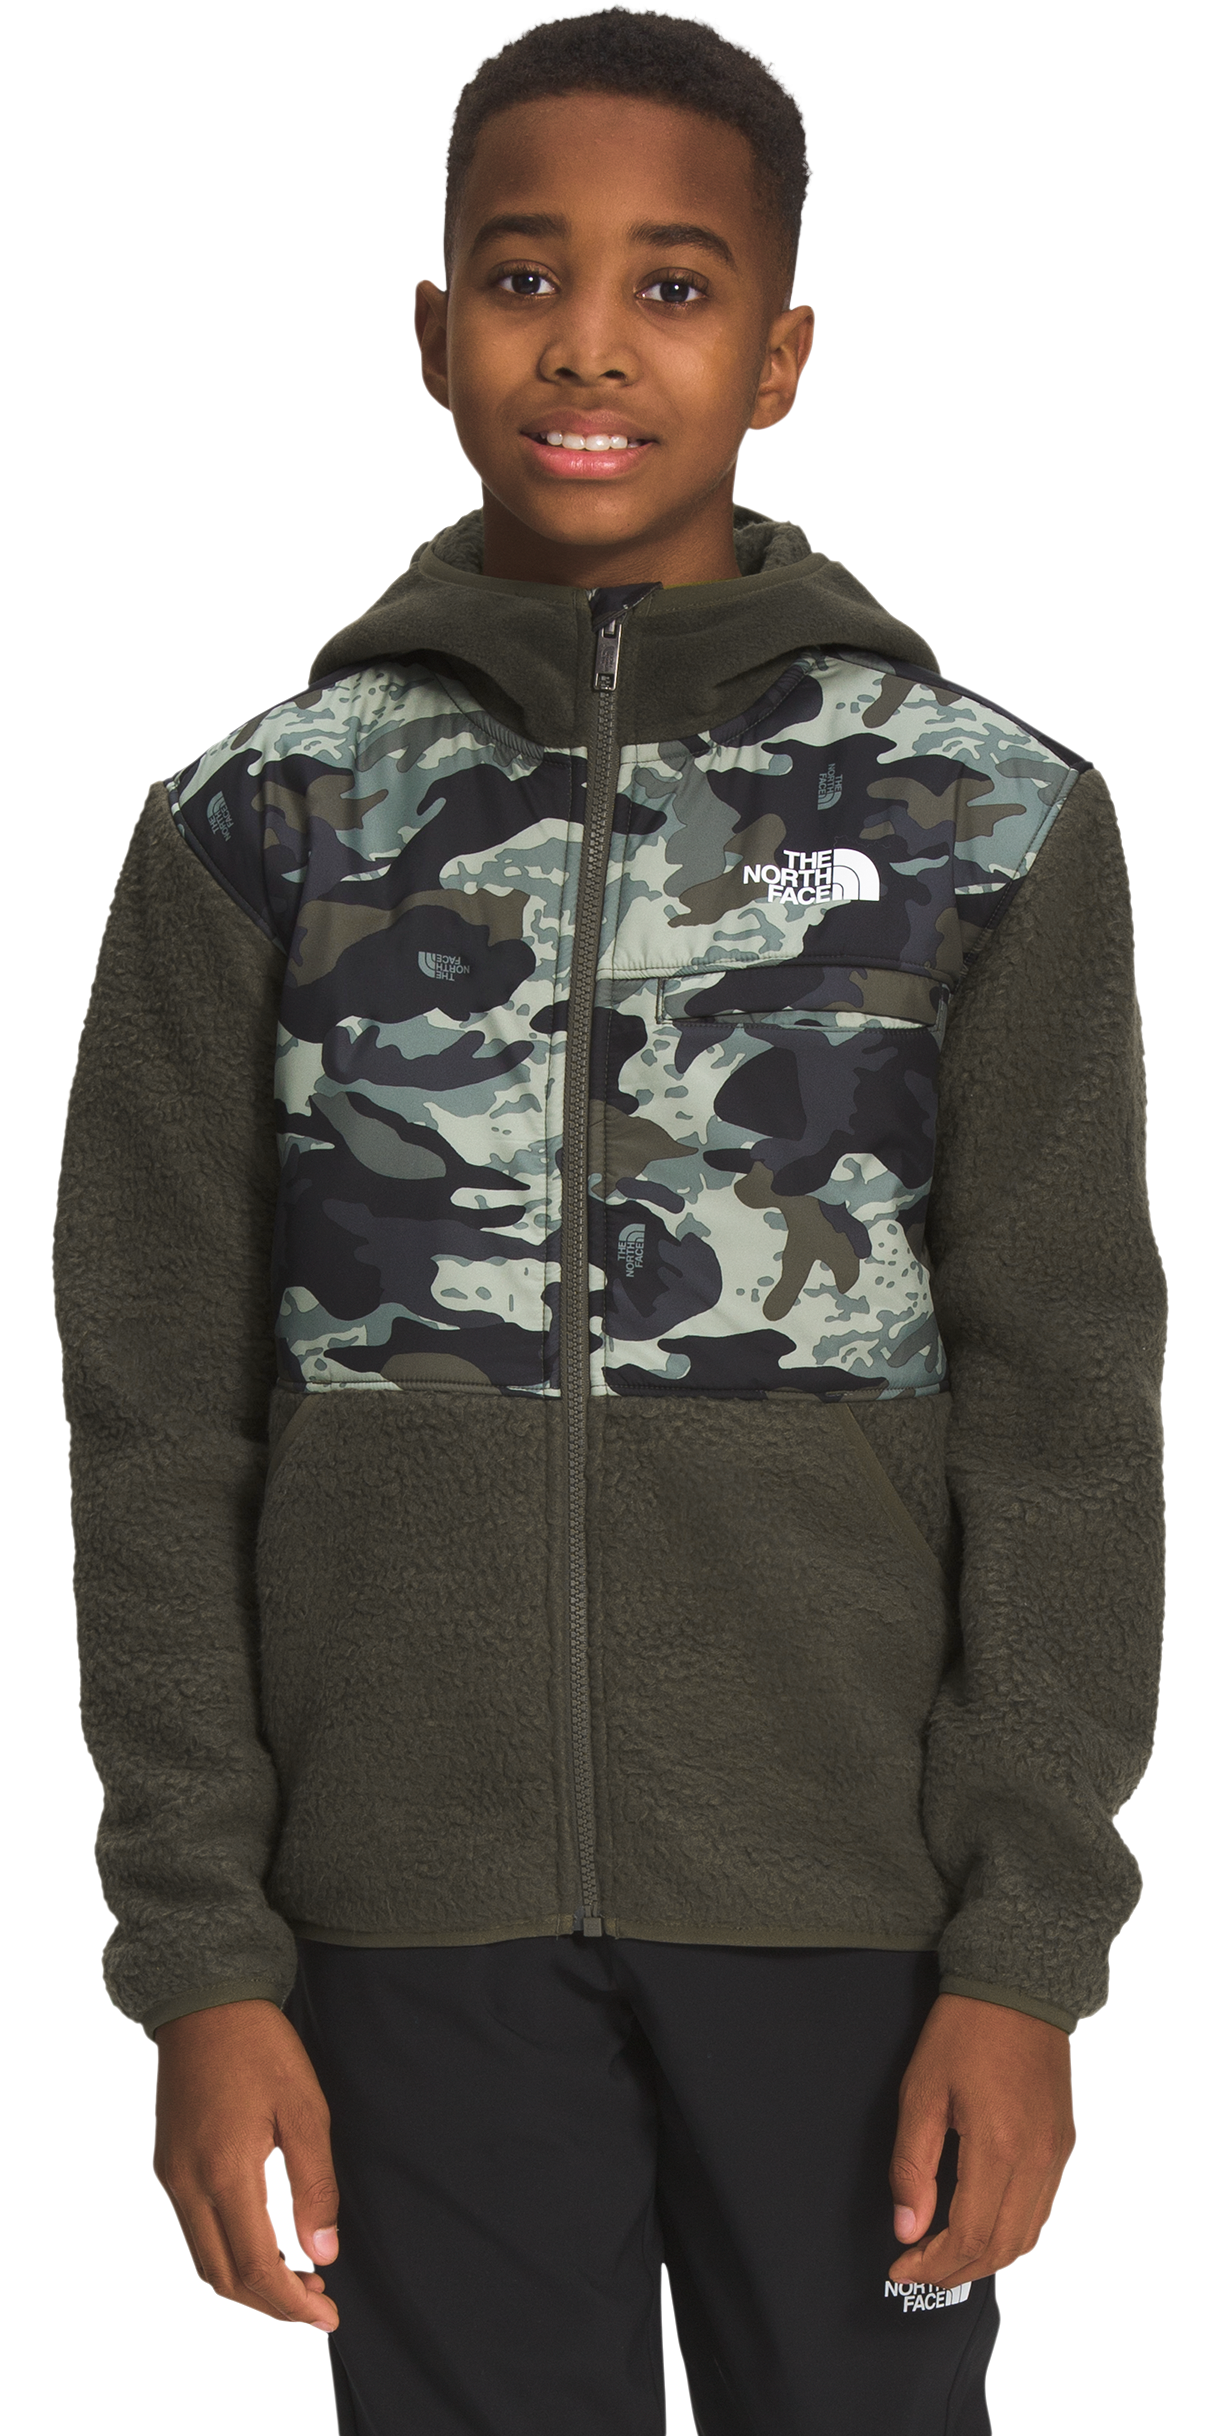 The North Face Forrest Full-Zip Hooded Fleece Jacket for Boys - New Taupe Green/Neverstop Camo - S